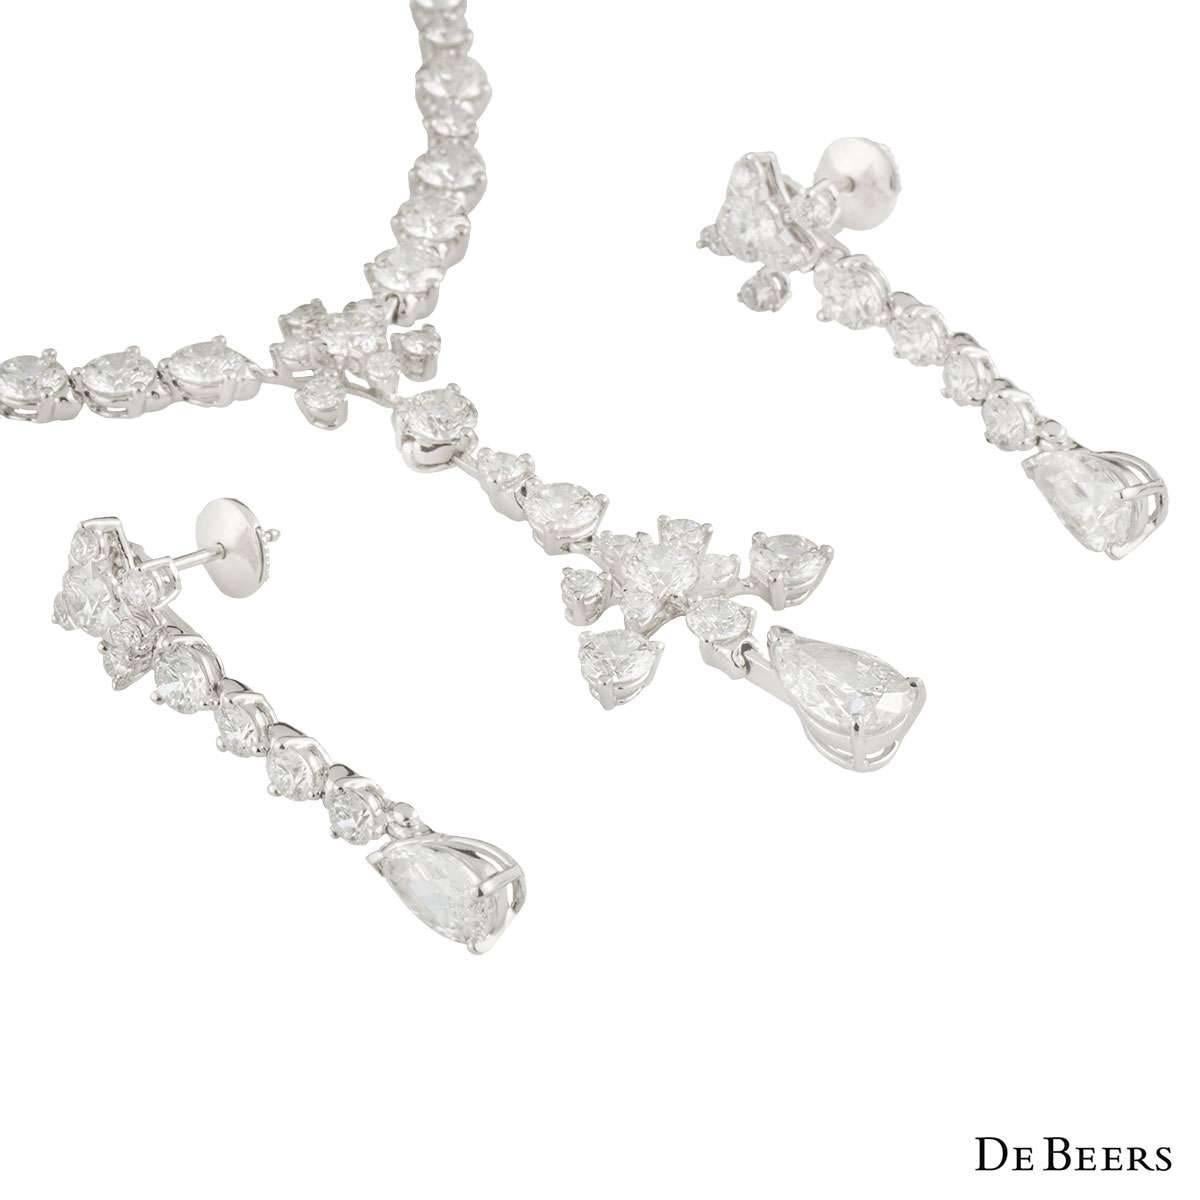 An exquisite necklace and earring suite in platinum from the Lea collection by De Beers. The necklace is comprised of 110 diamonds with a total diamond weight of 14.95ct. The feature diamond is a pear cut weighing 1.51ct, G colour and SI2 clarity.